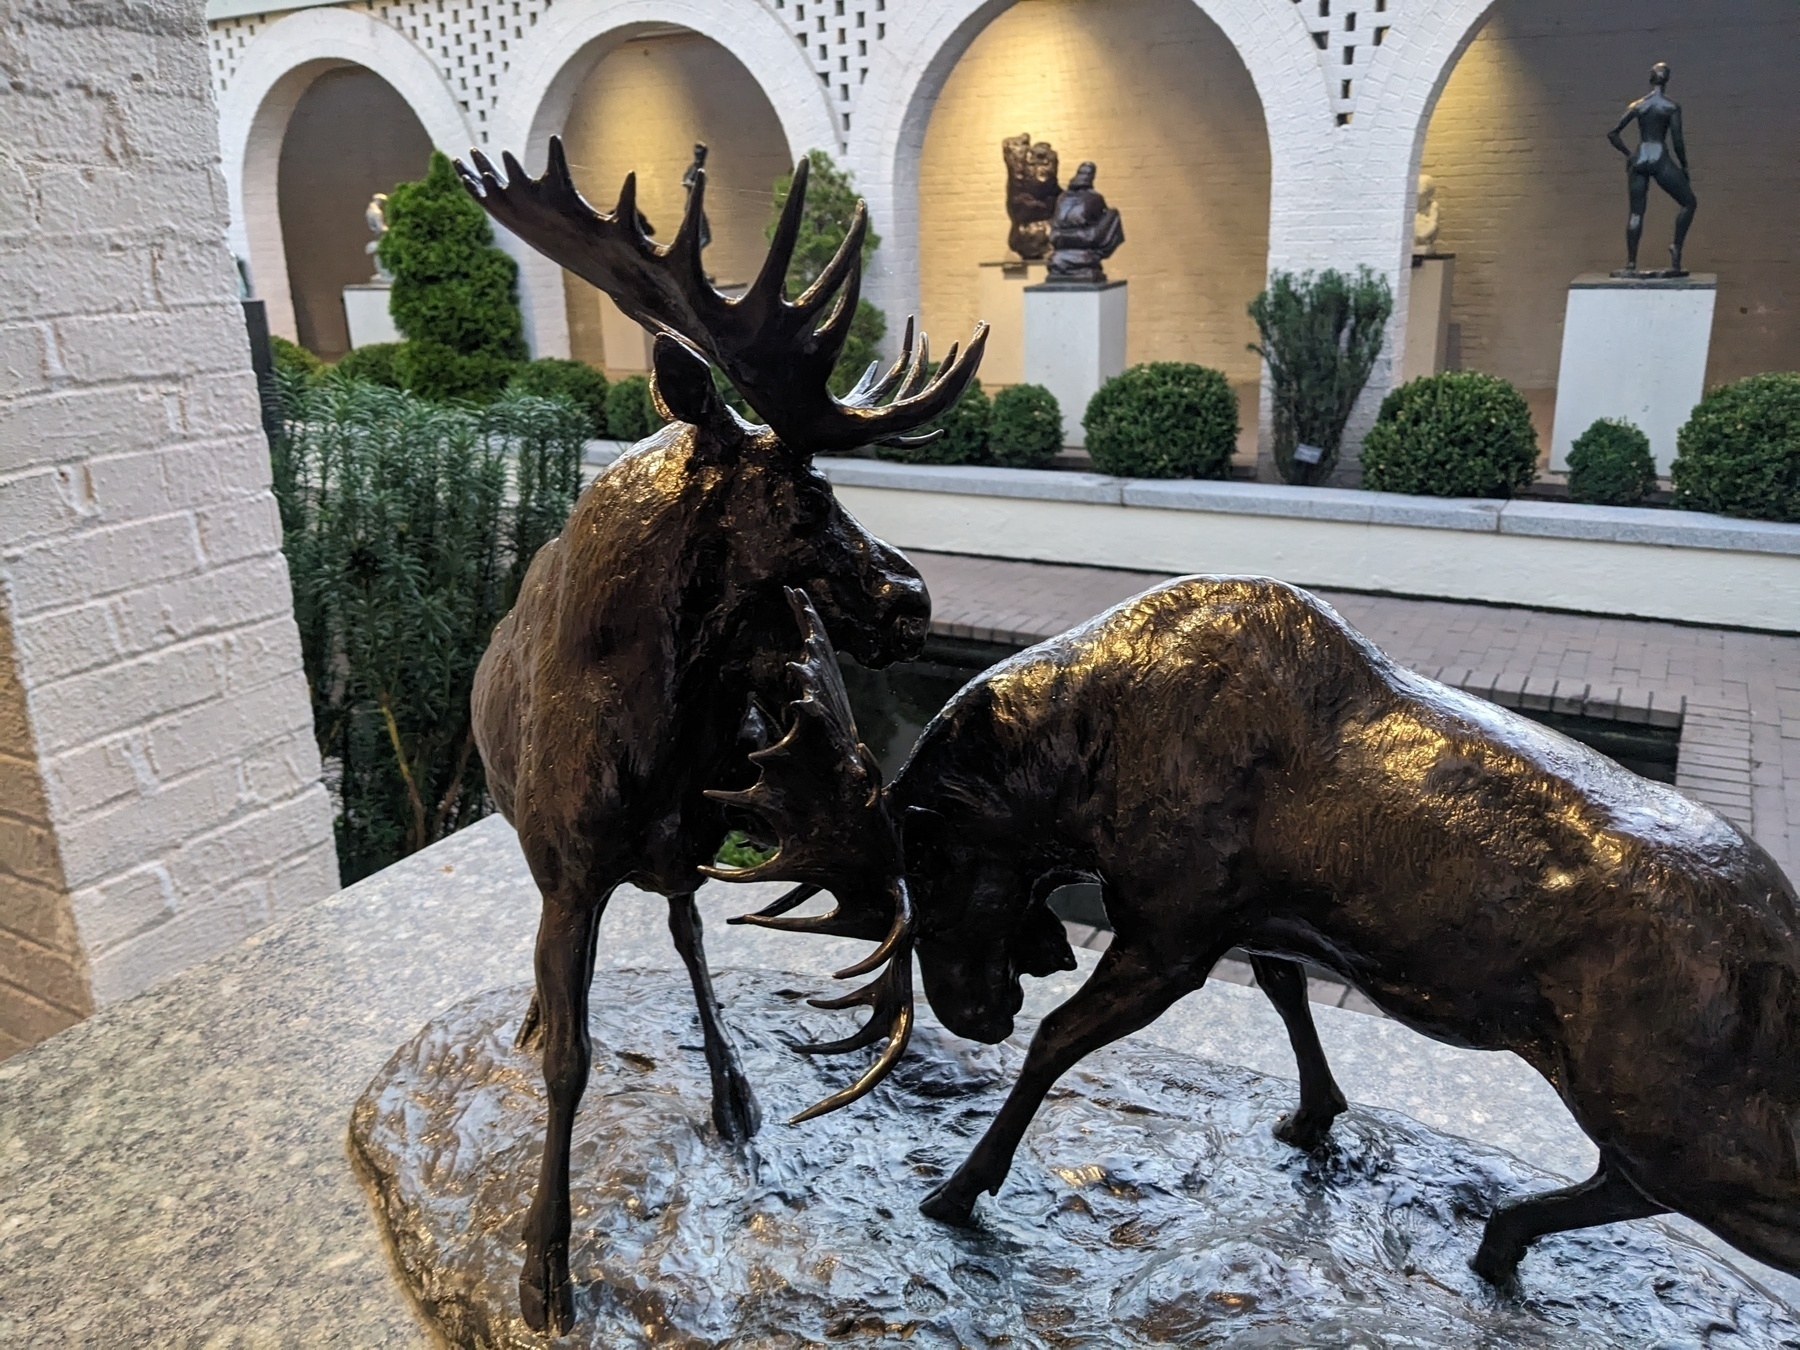 A sculpture at Brookgreen Gardens of two moose fighting.